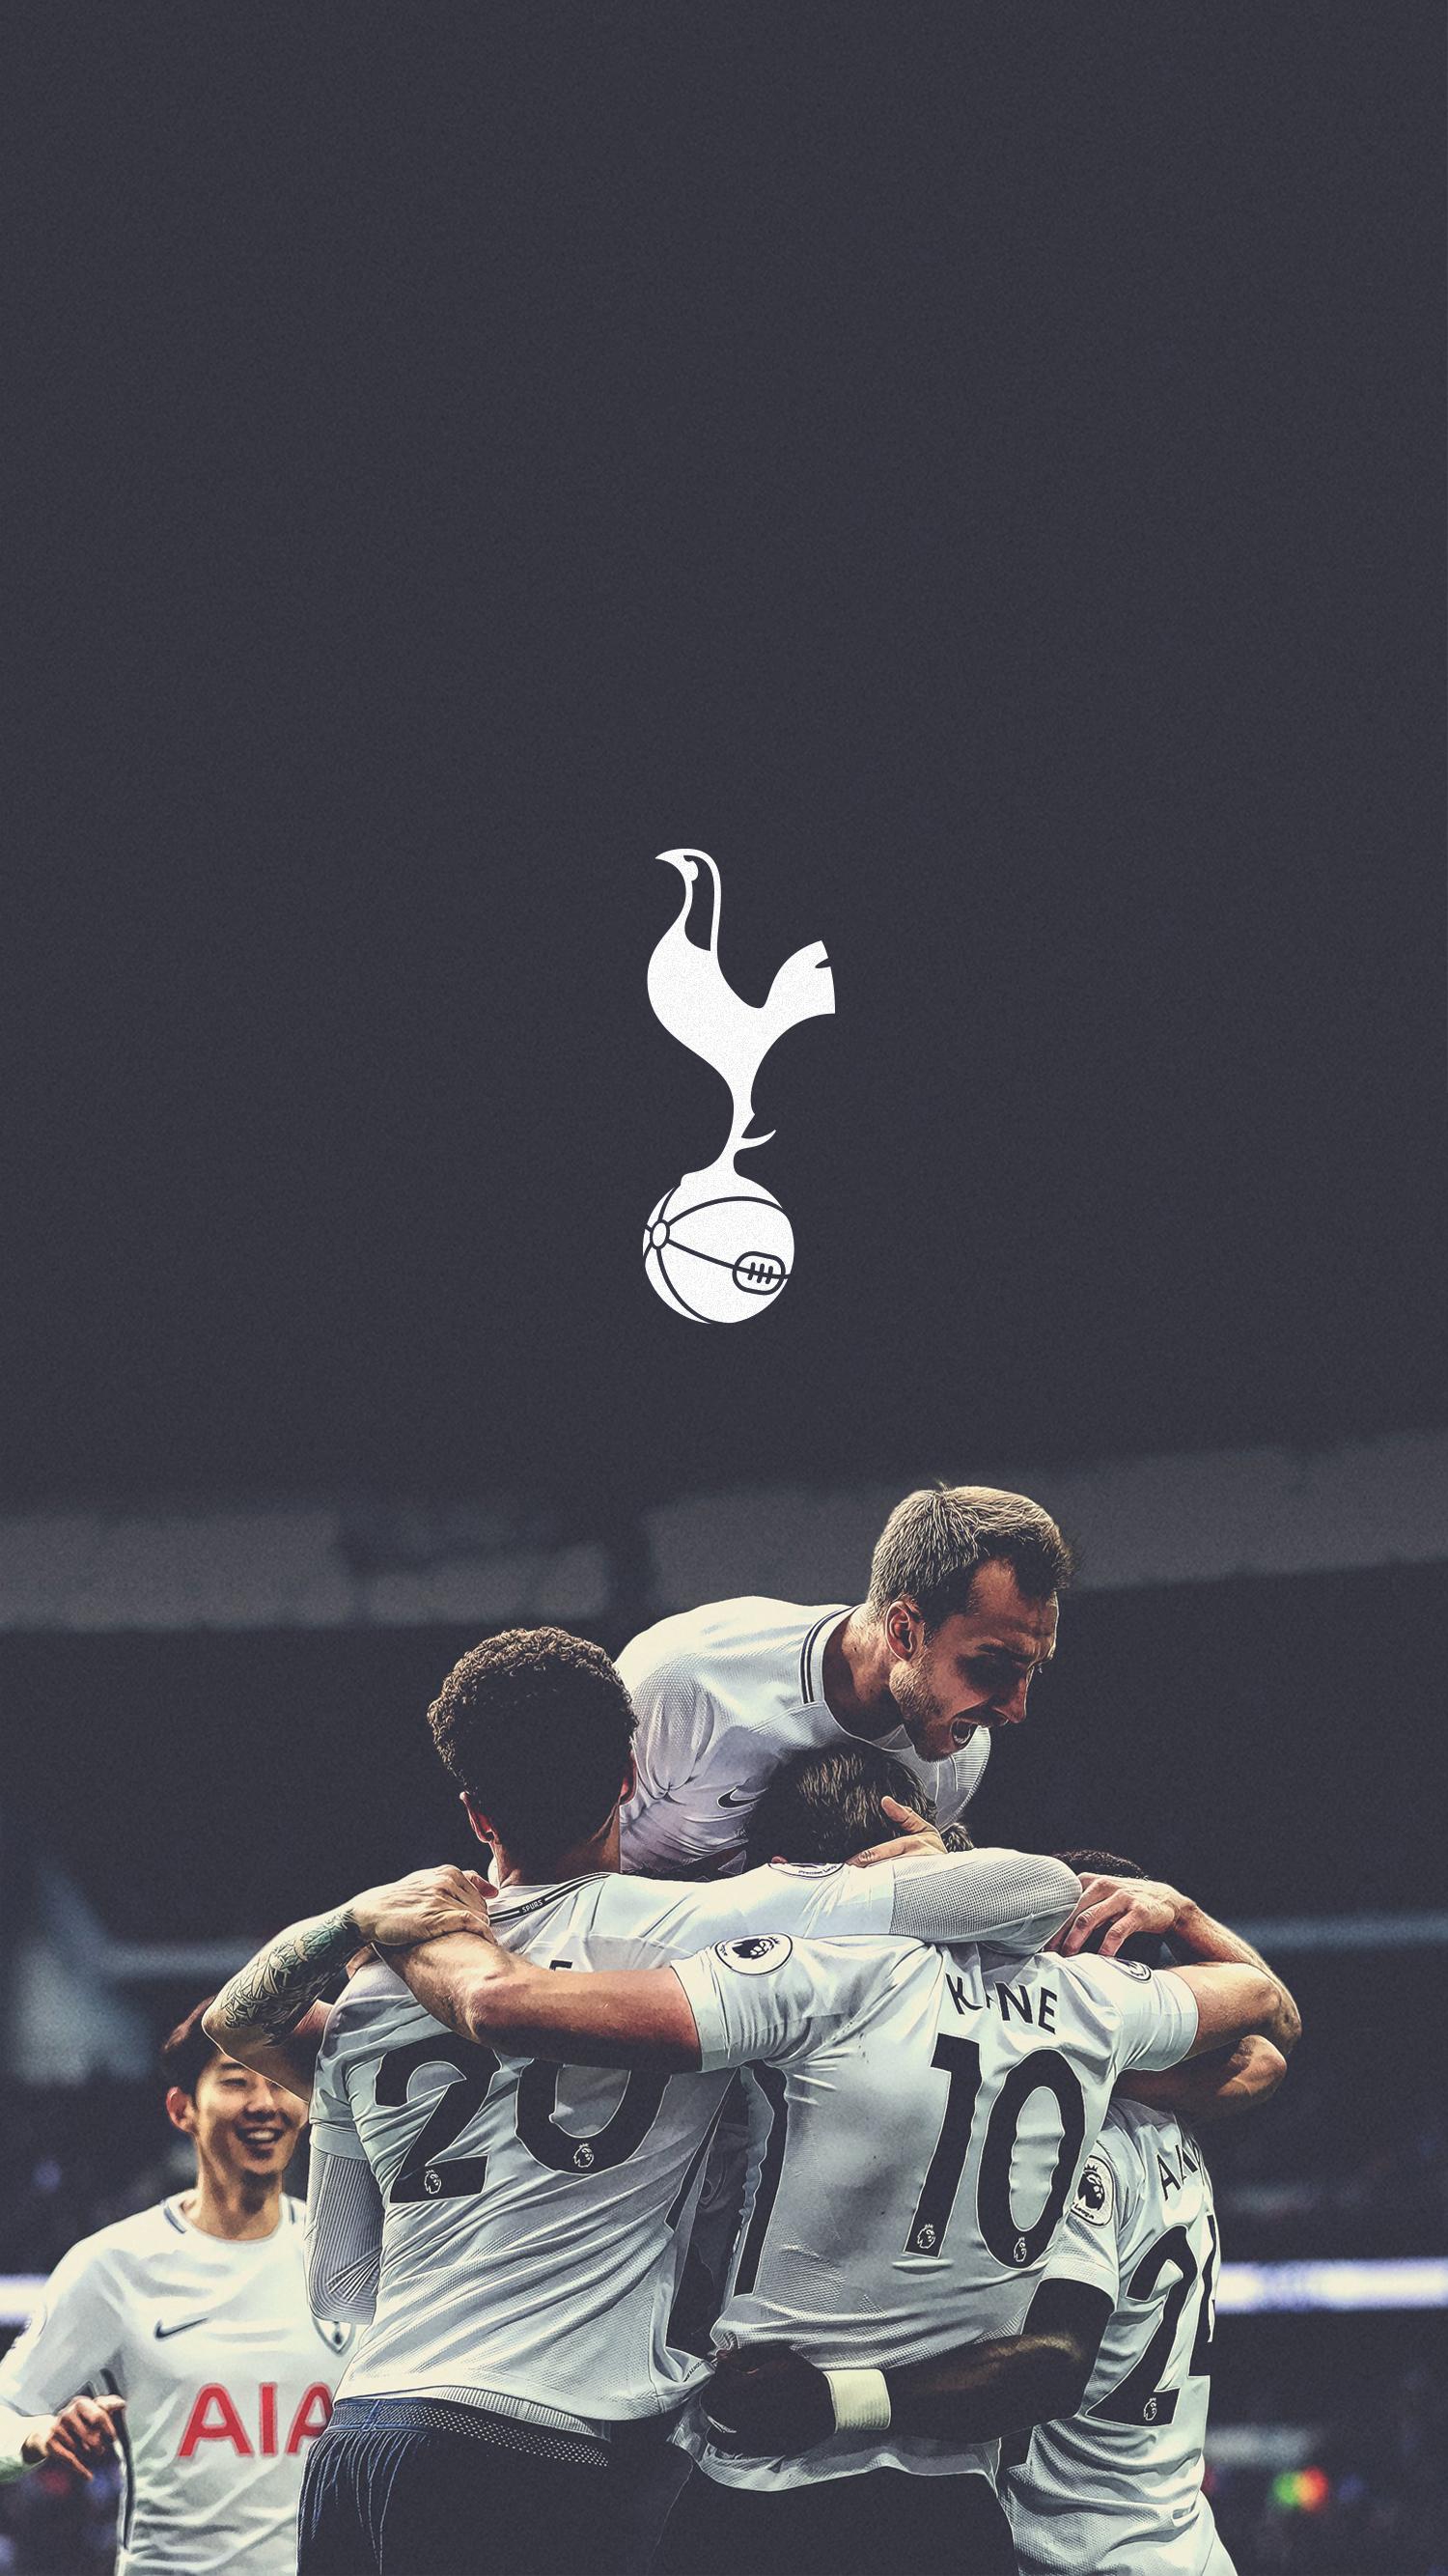 iPhone Wallpaper I made for fellow yids